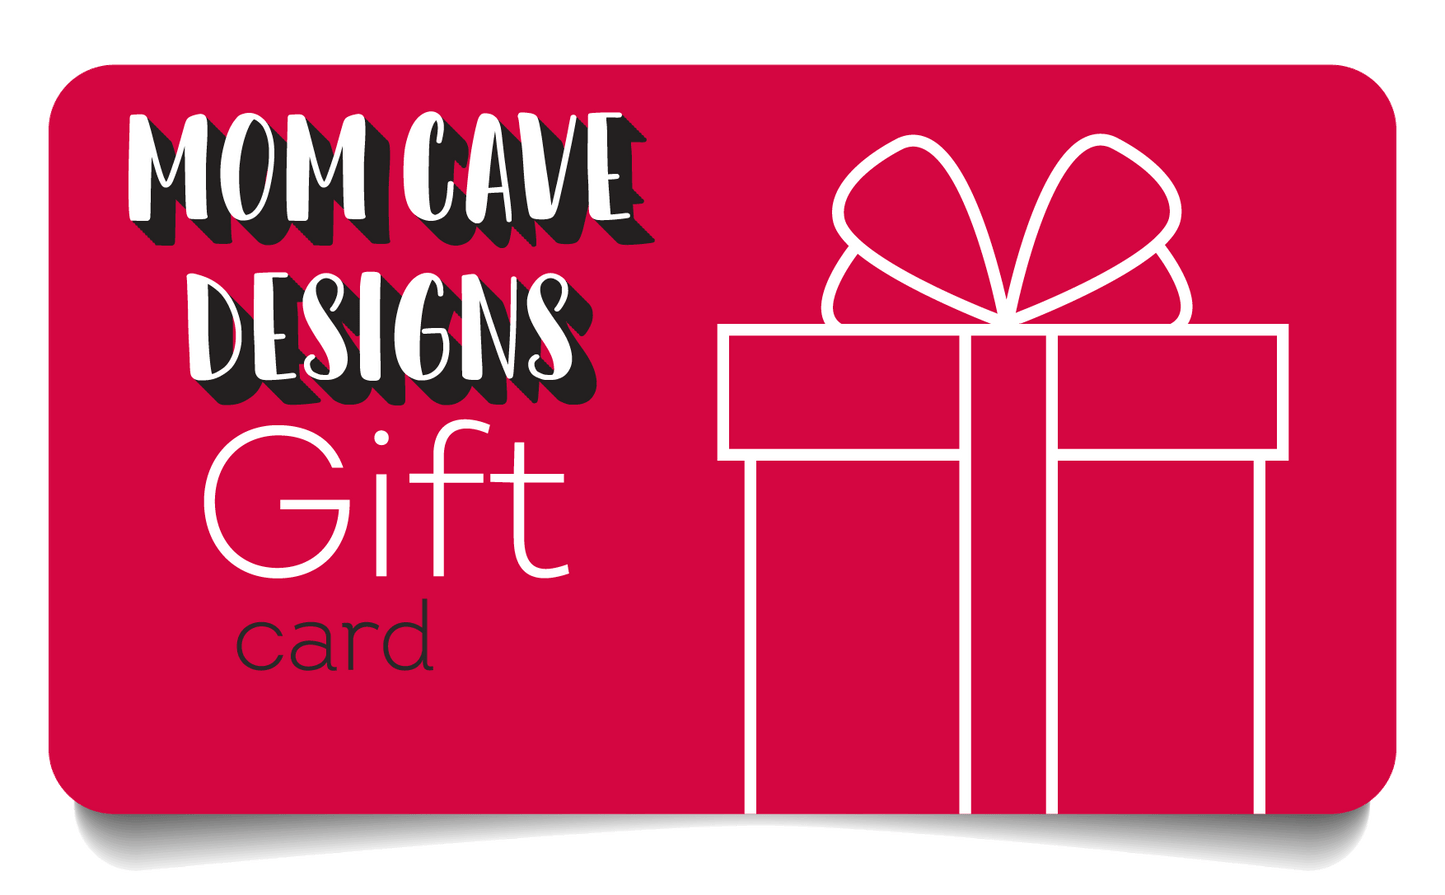 Mom Cave Gift Card